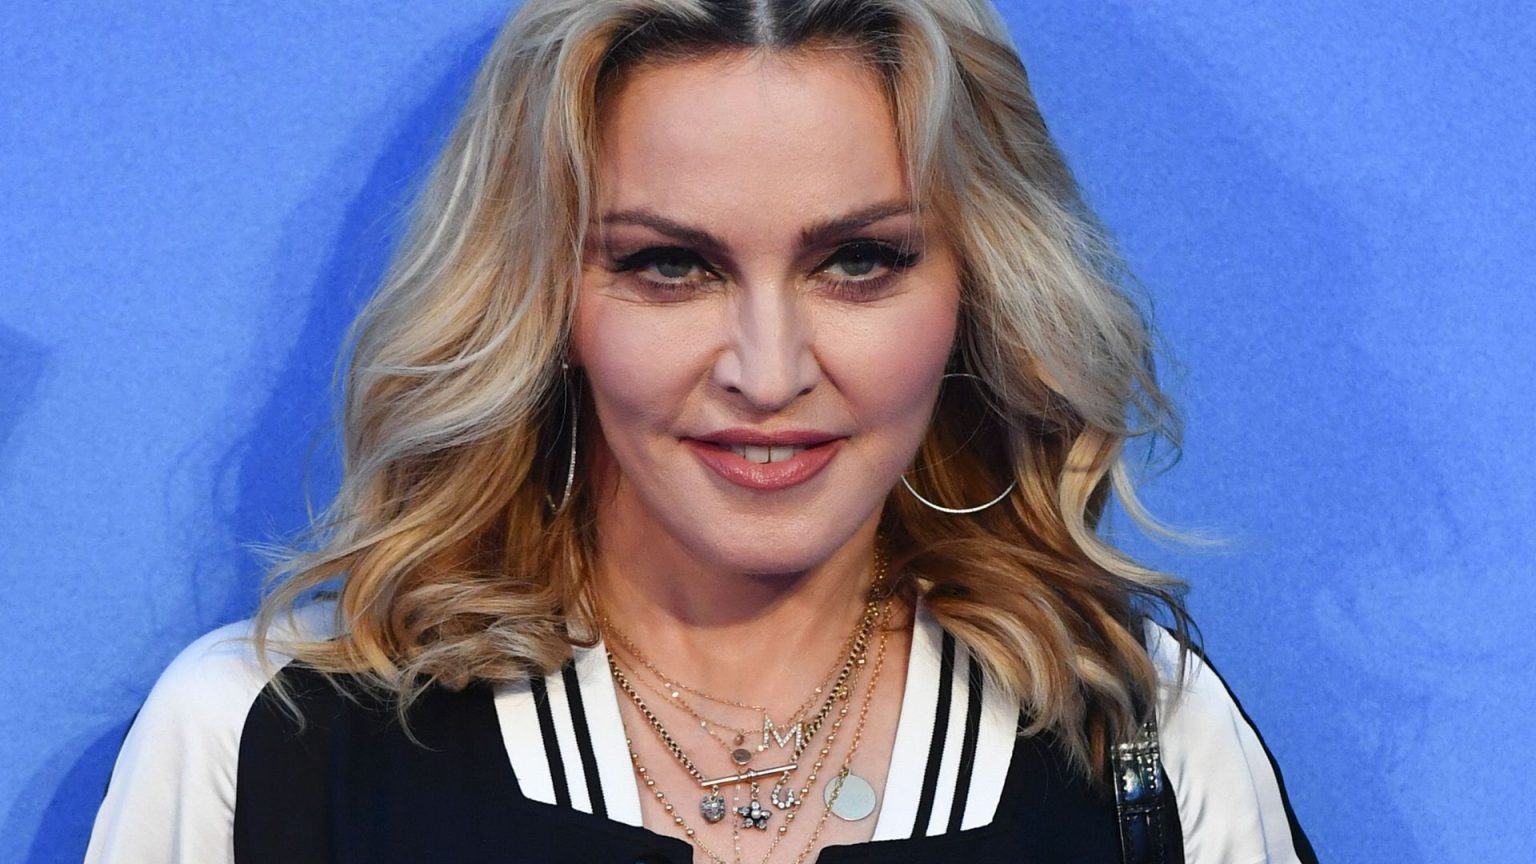 After fans' criticism new photos of Madonna without any filters